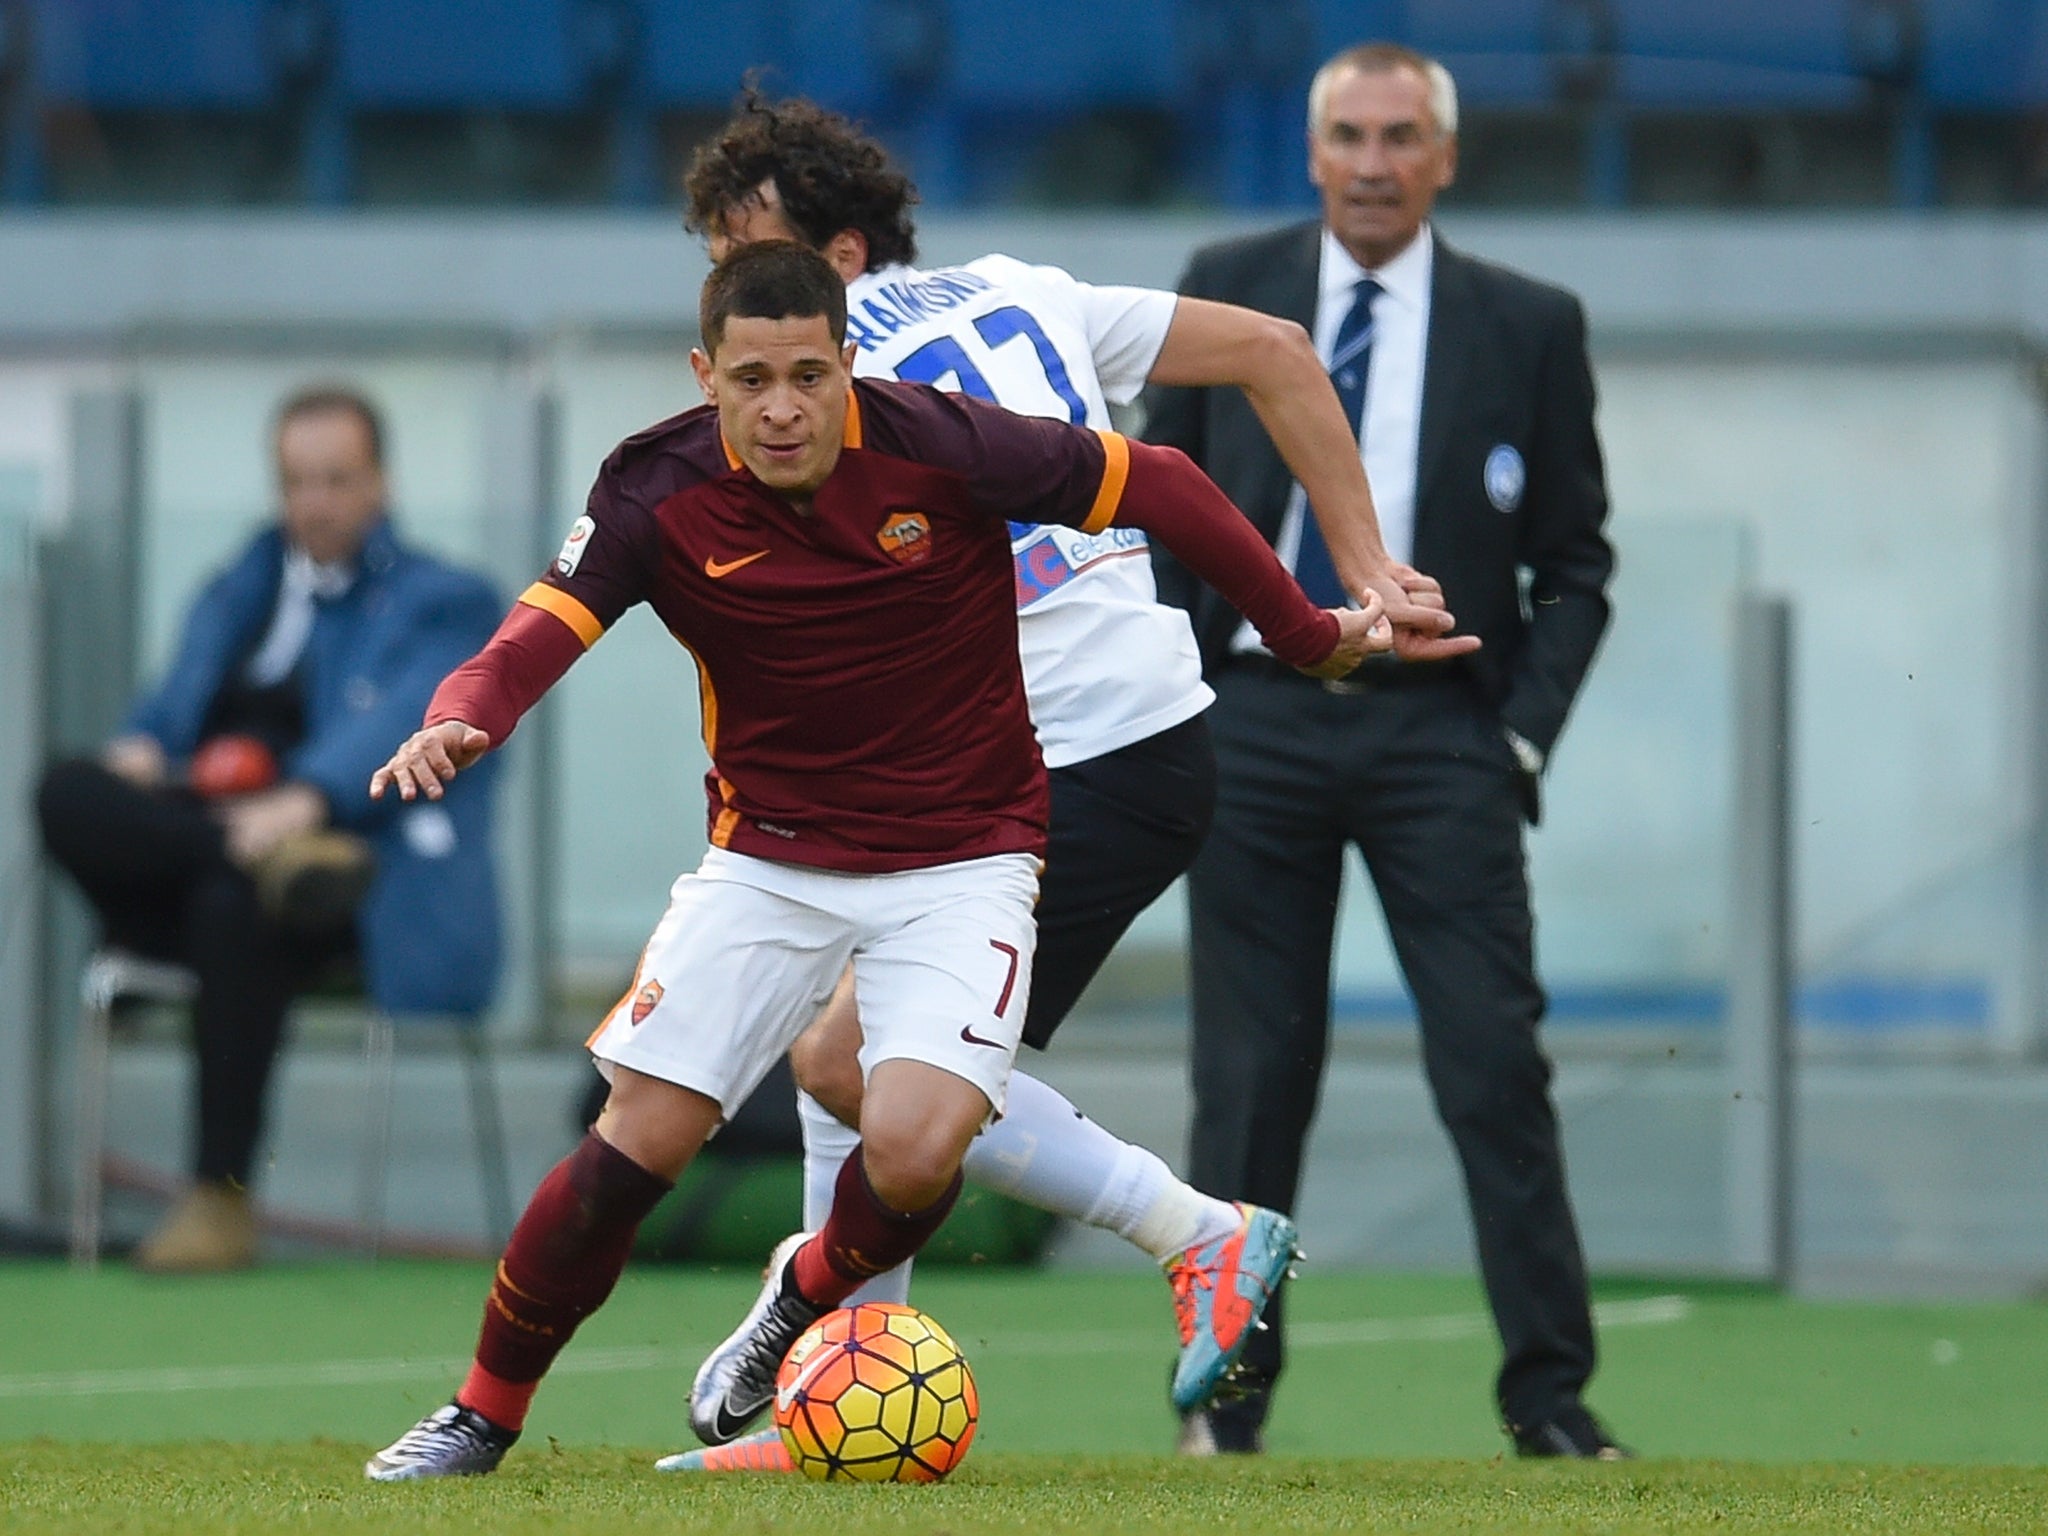 &#13;
Juan Iturbe joined this month&#13;